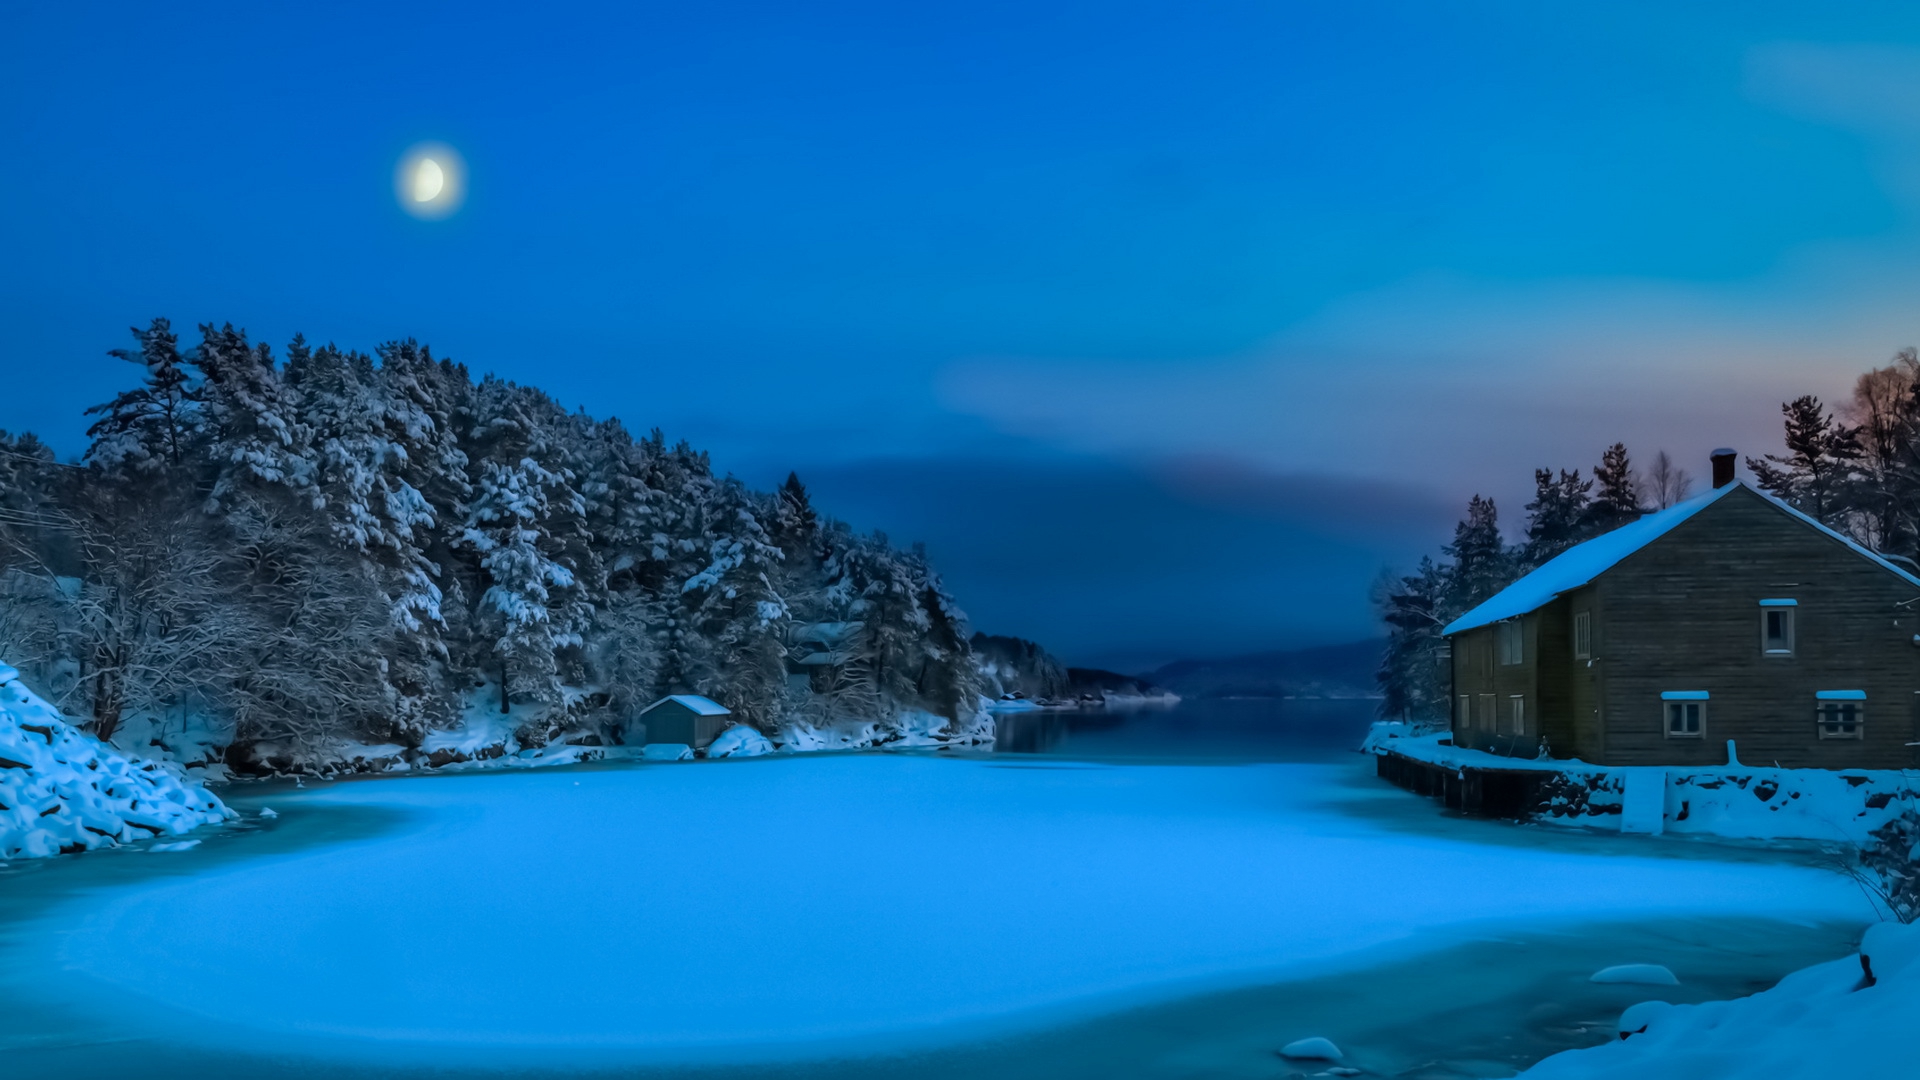 man made, house, bay, moon, night, norway, snow, tree, winter lock screen backgrounds